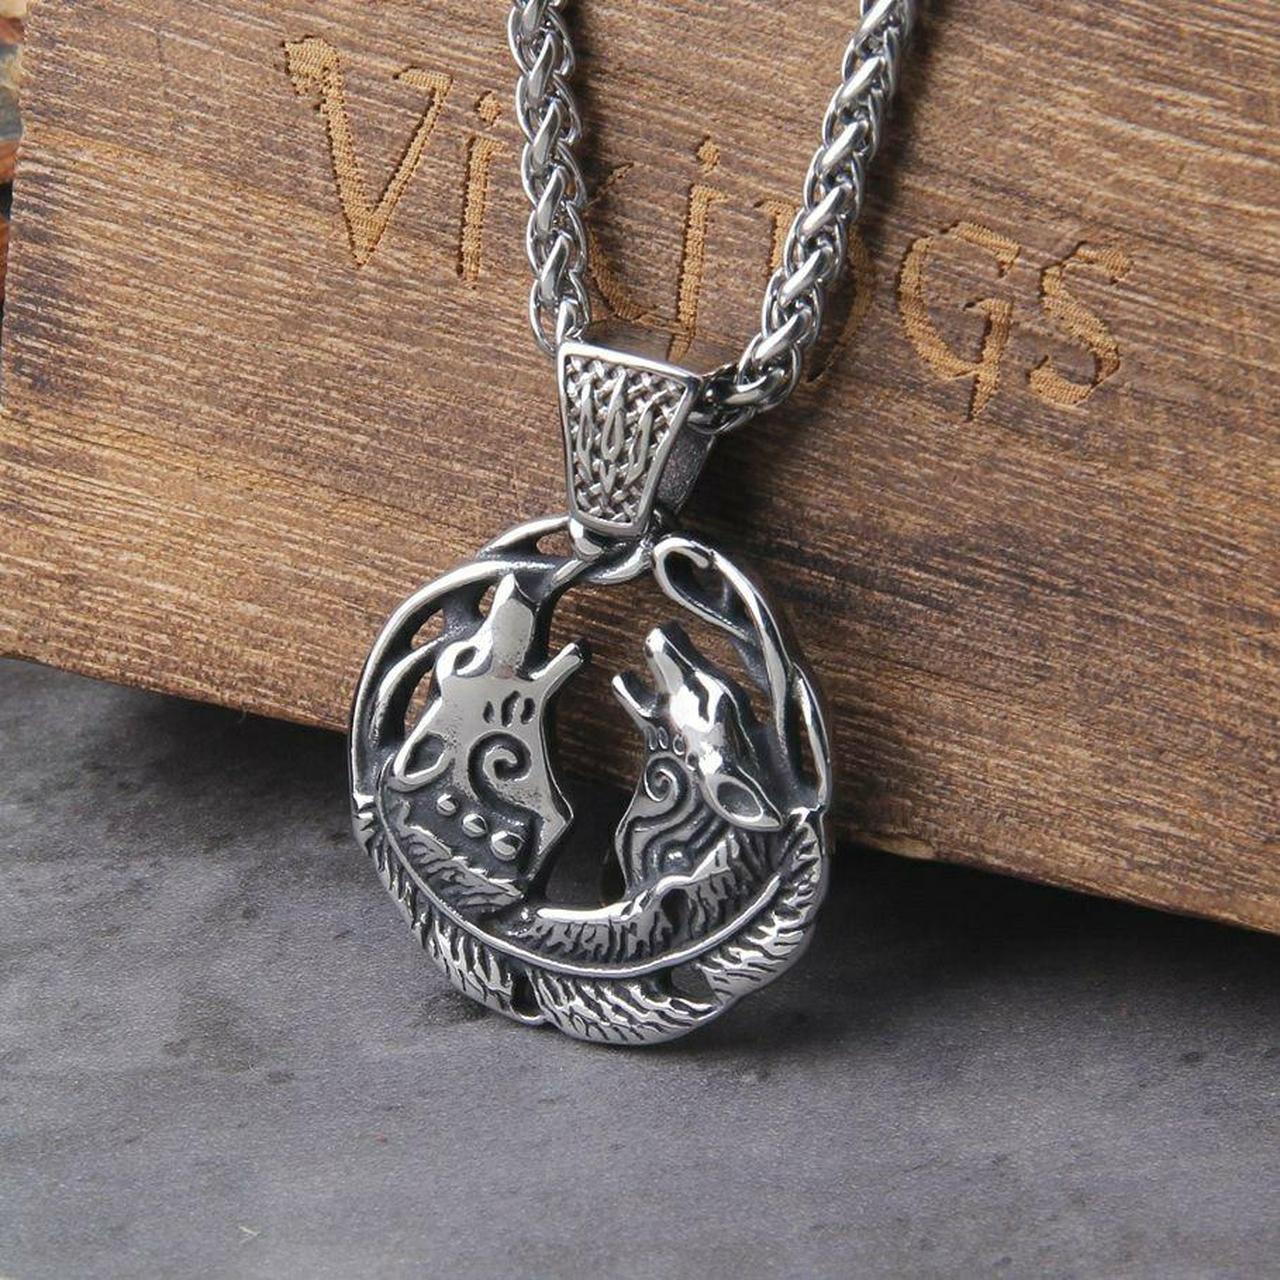 Buy Howling Wolf Bff Necklace for 2, Friendship Gifts, Wolves, Interlocking  Puzzle Necklaces, Best Friends Forever, Hand Cut Coin Online in India - Etsy